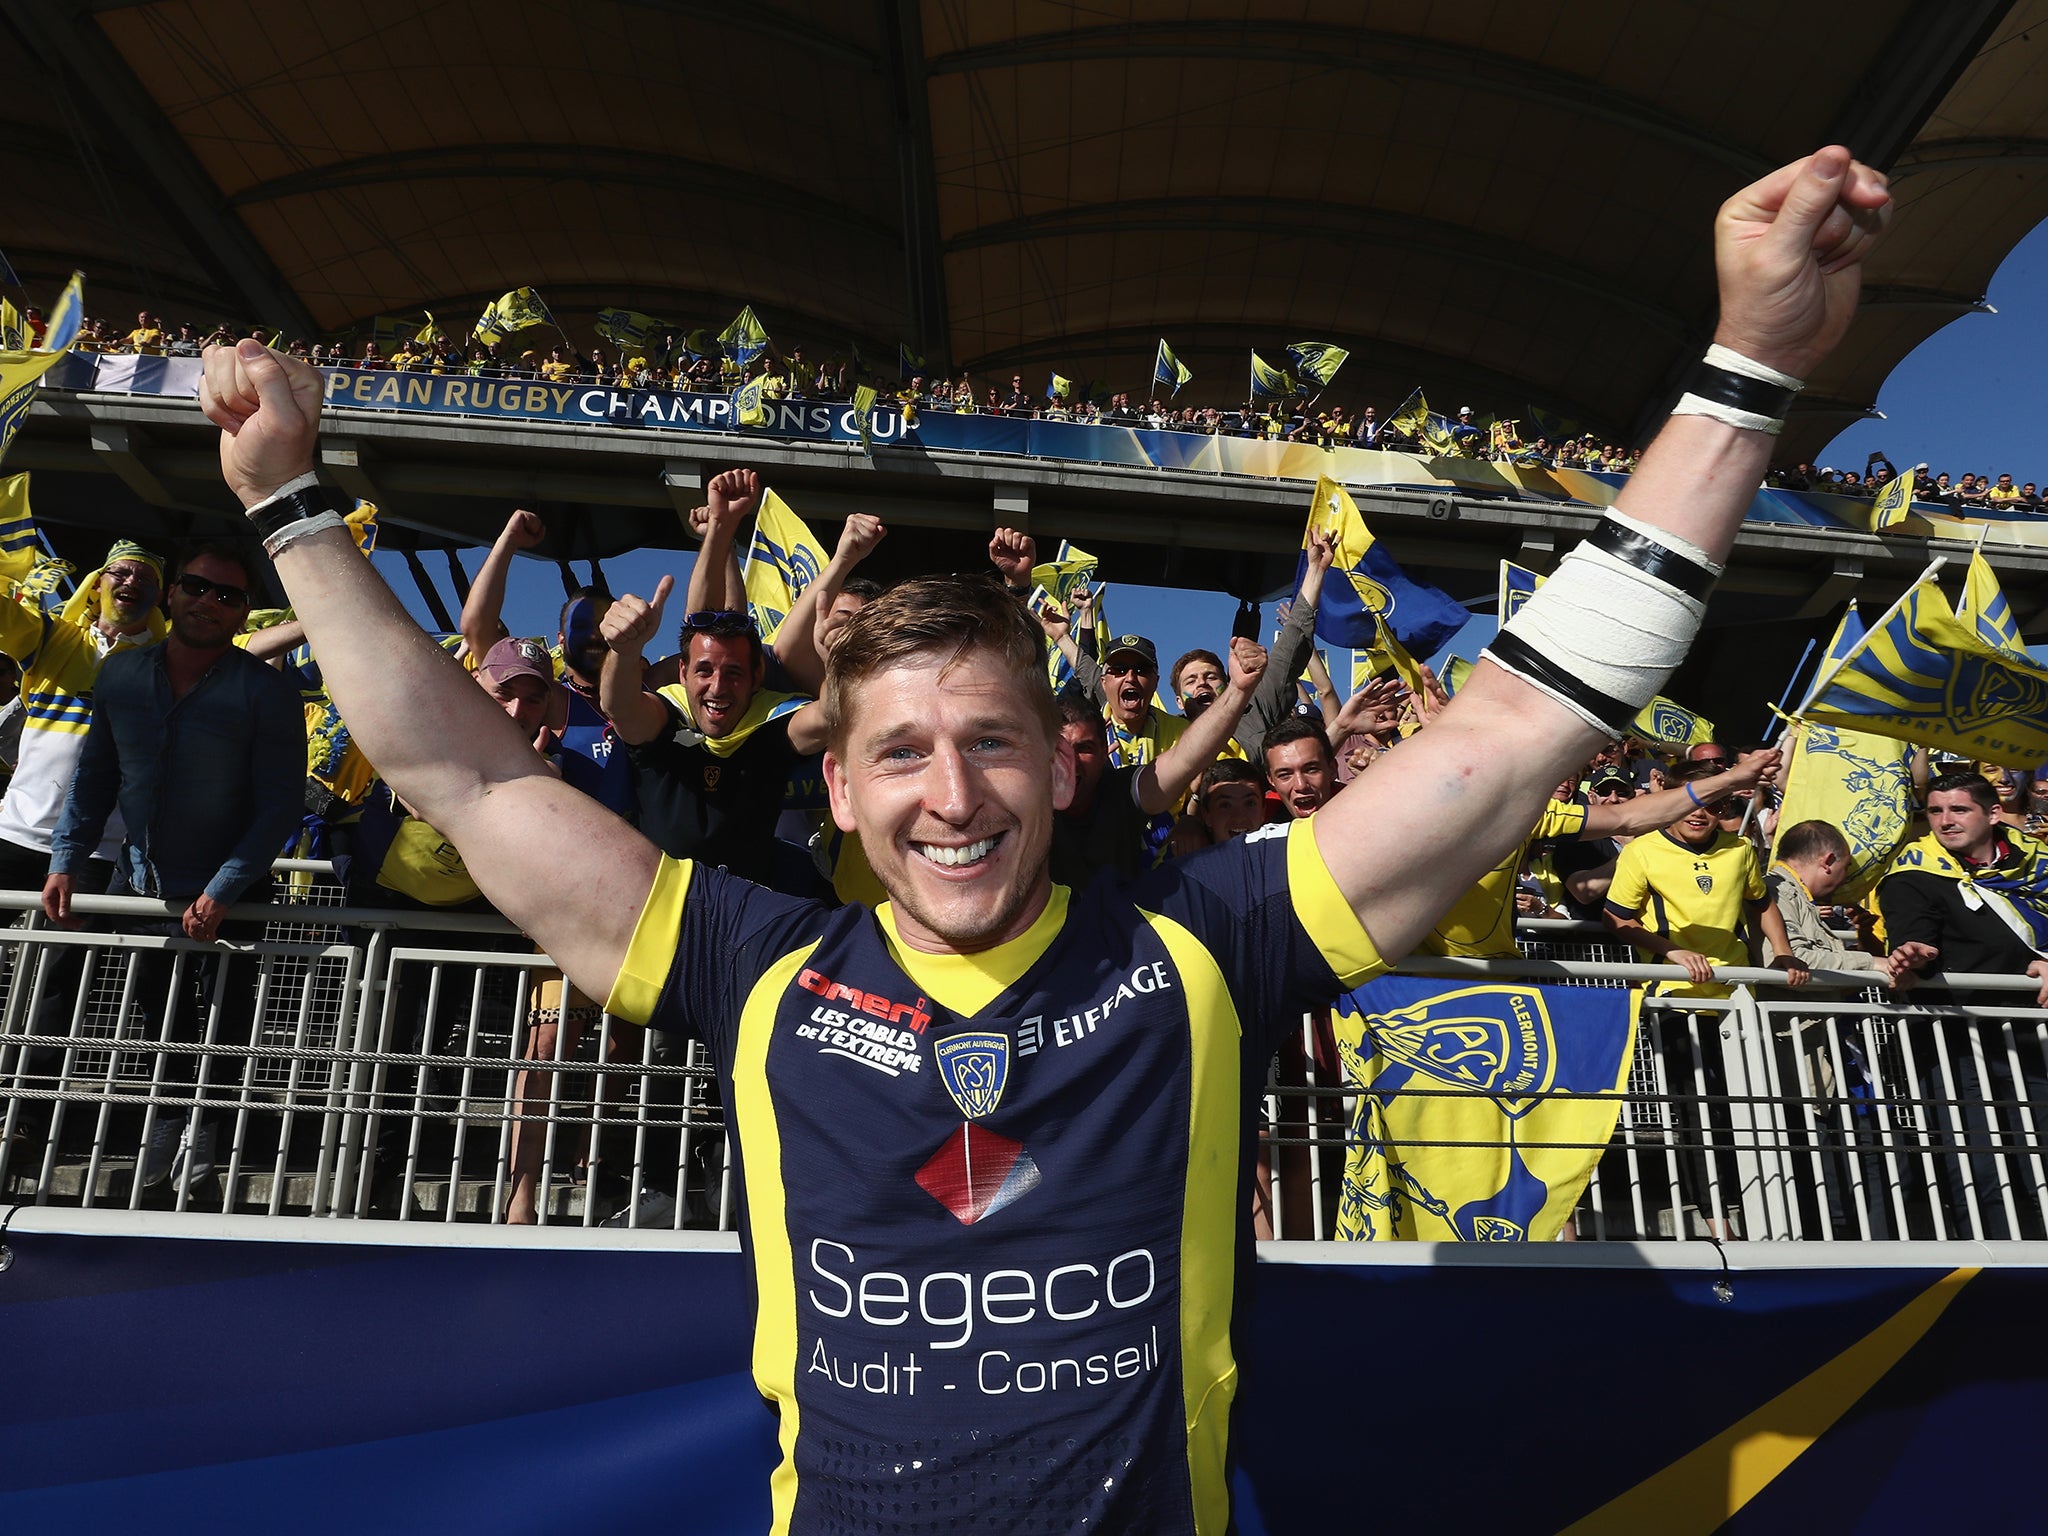 Strettle won the Top 14 title with Clermont Auvergne last season